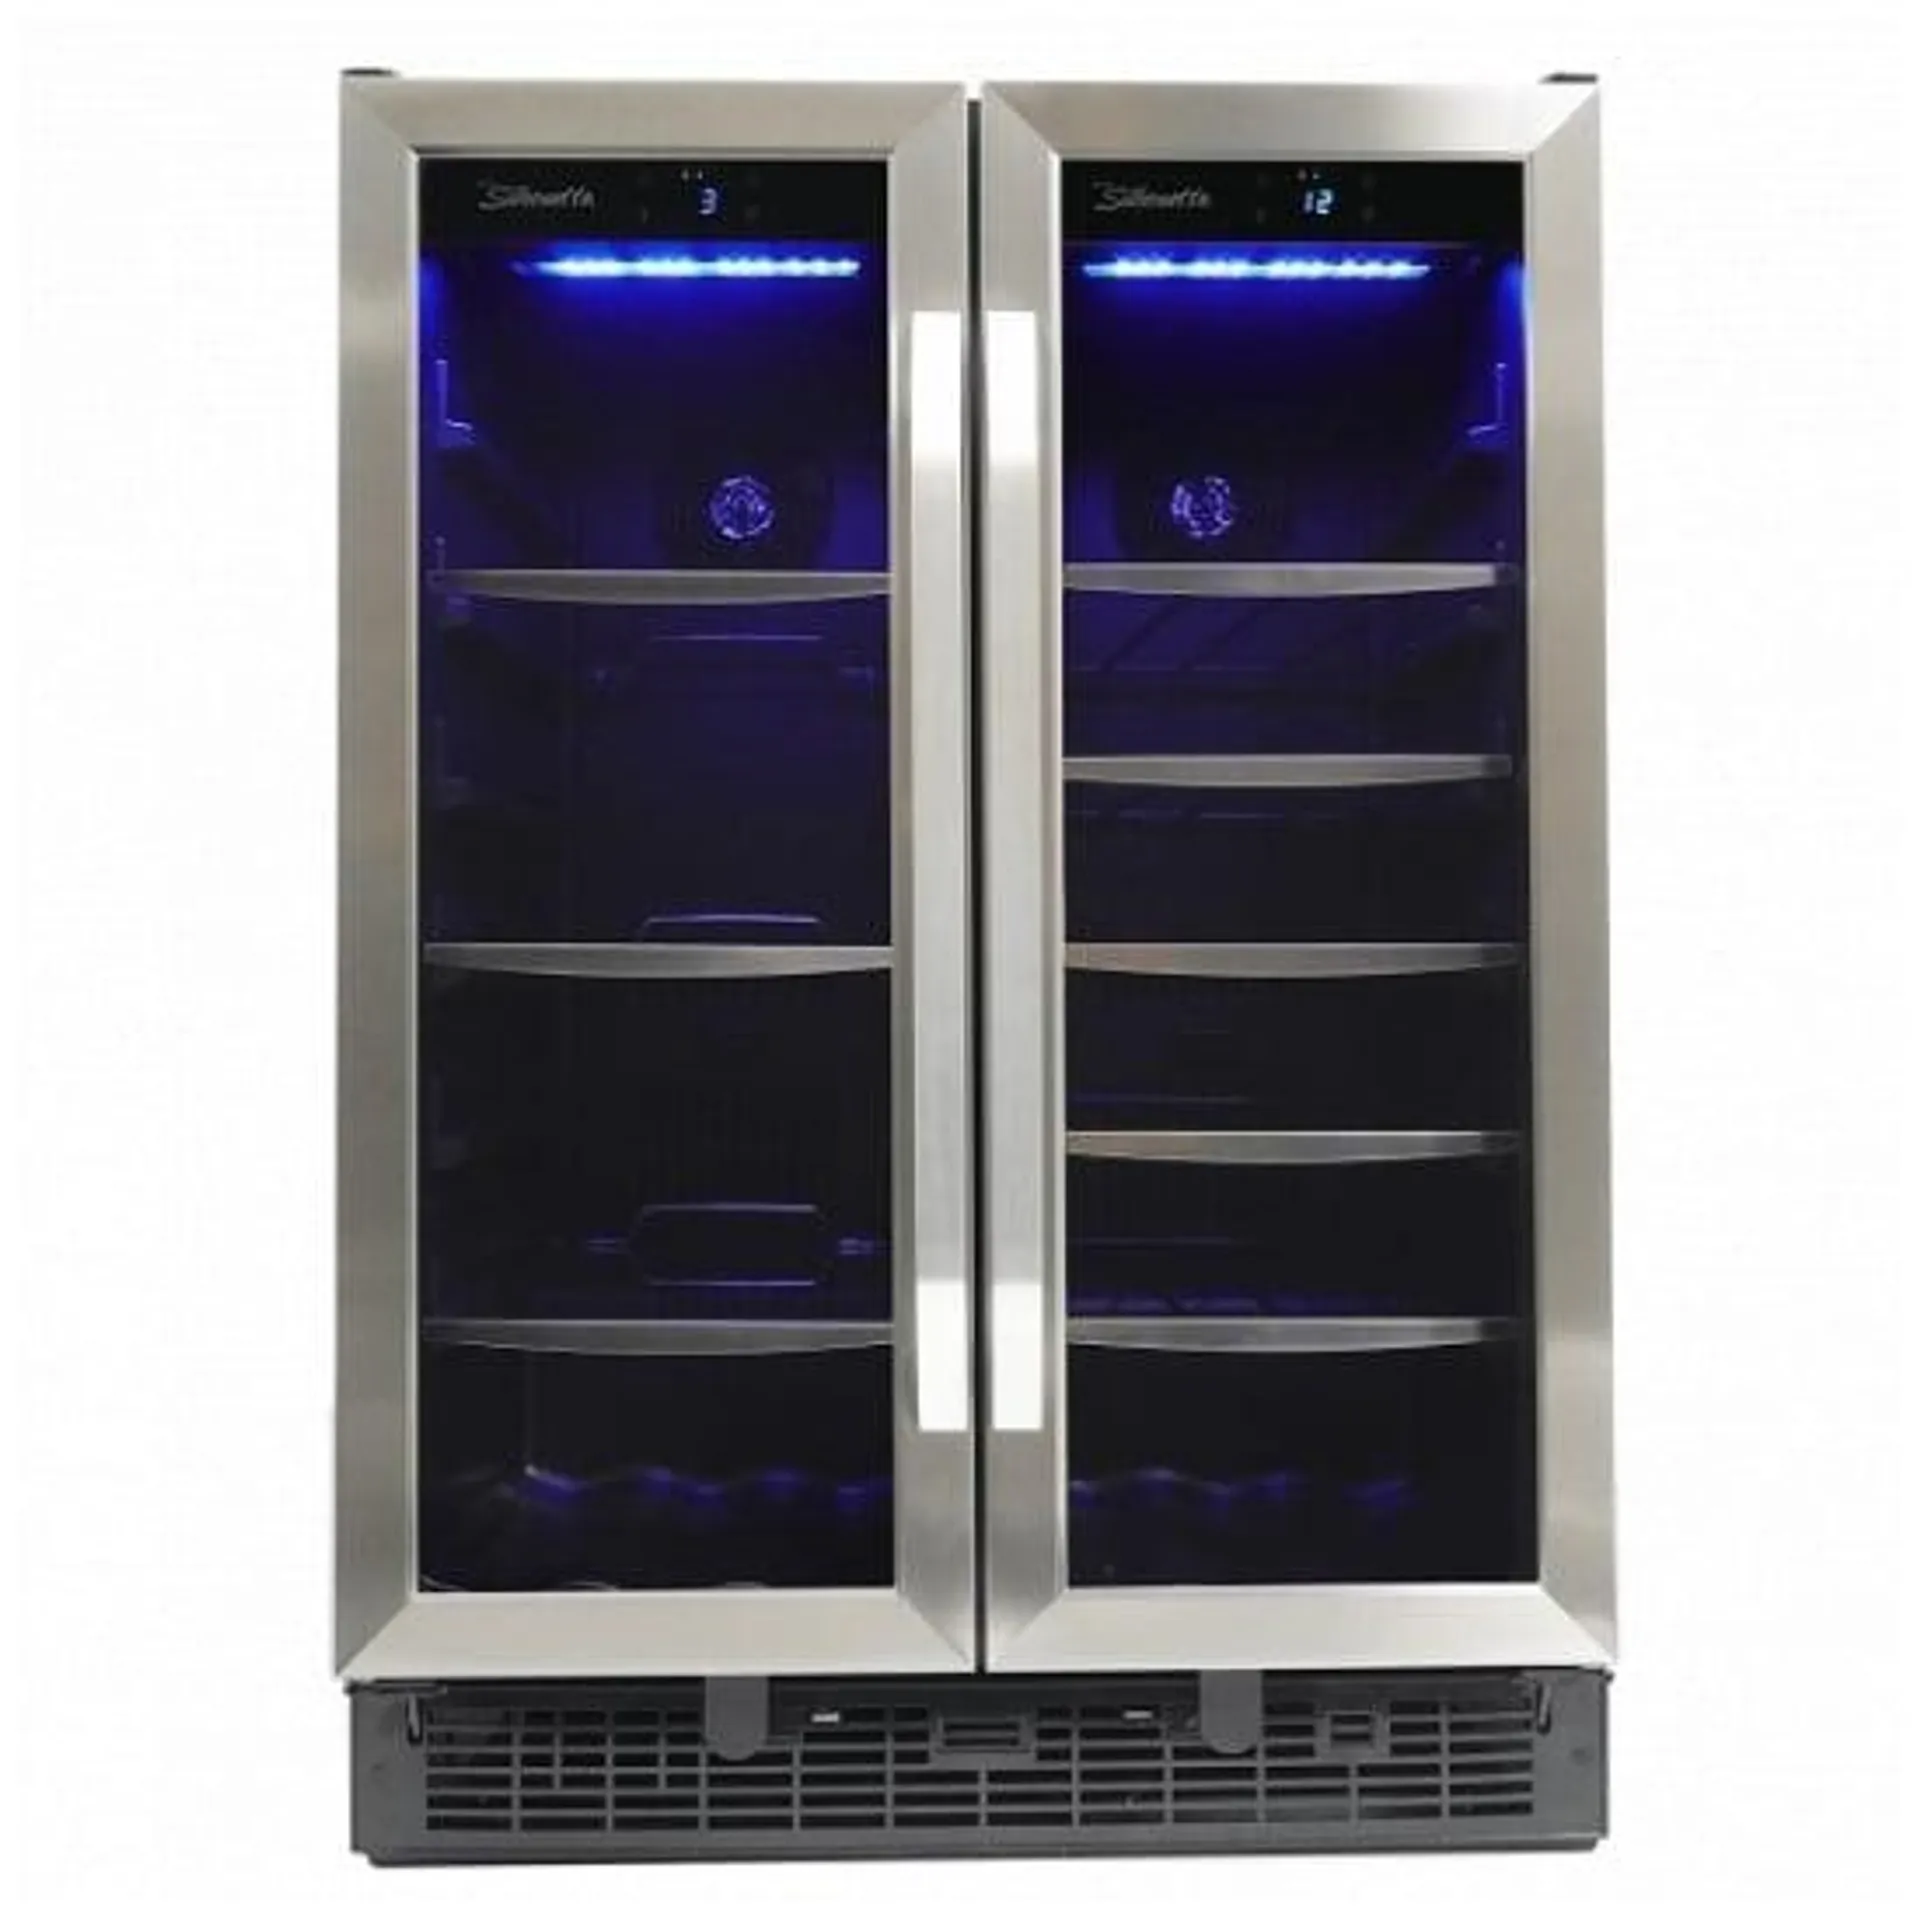 Silhouette SBC051D1BSS Beverage Center, 24 inch Width, 24 inch Width, 30 Wine Bottle Capacity, Stainless Steel colour Blue LED Interior, Dual Zone